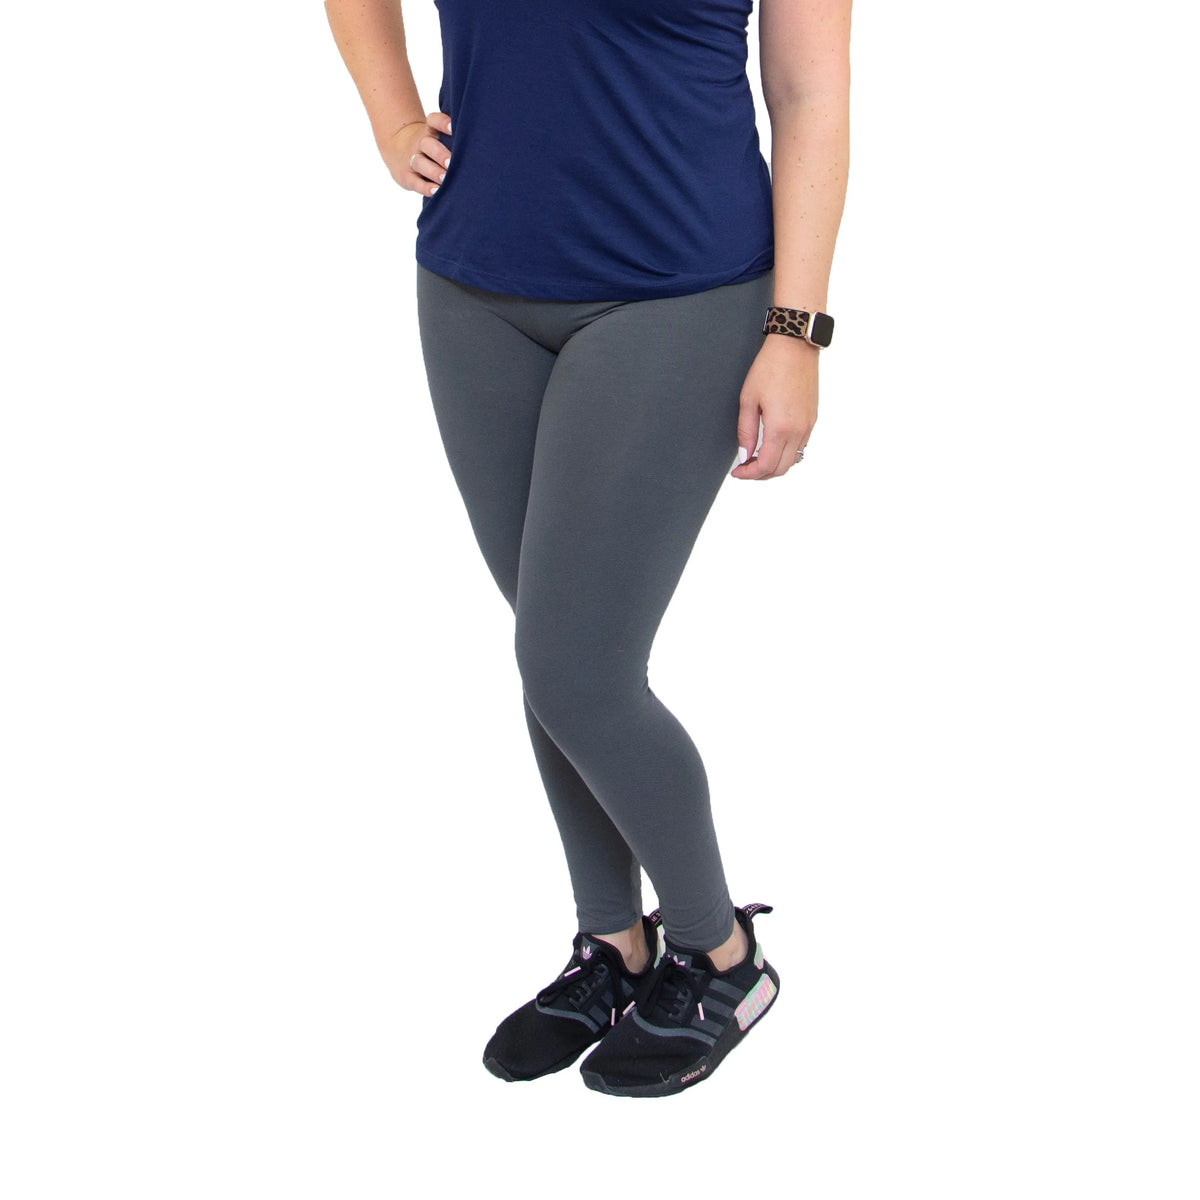 Combed Spandex Jersey Legging - All American Clothing Co